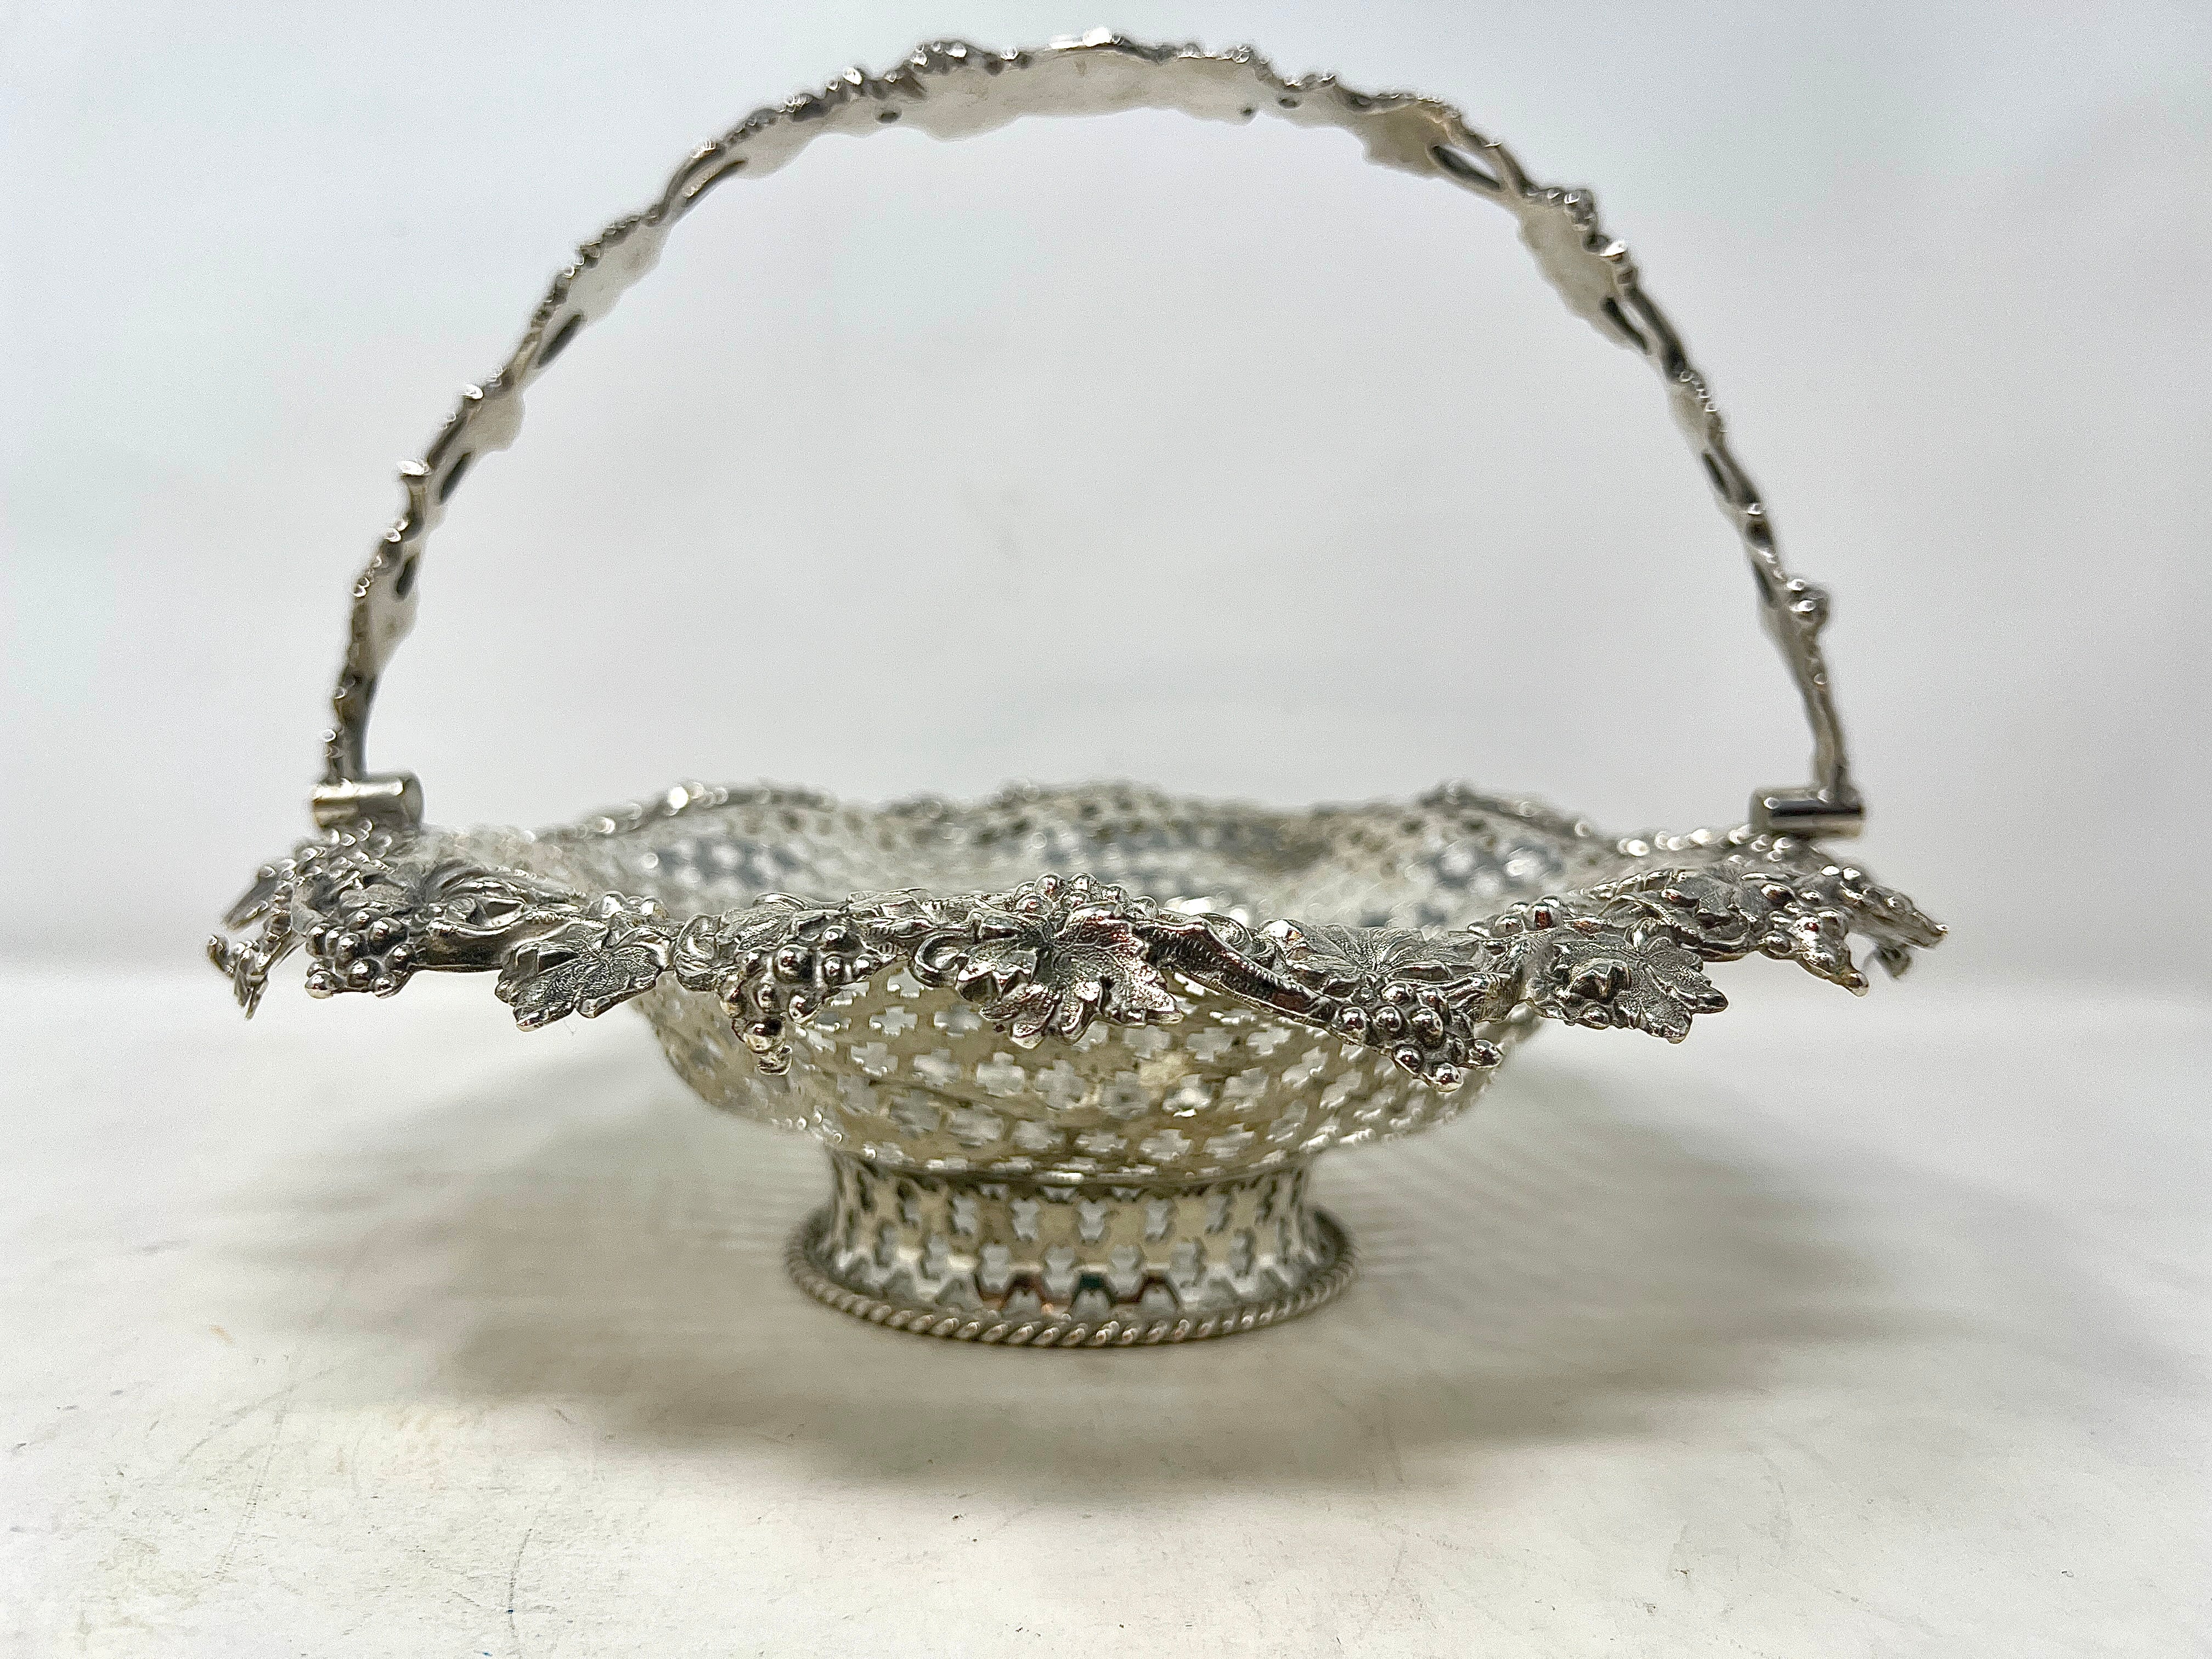 Antique English Hallmarked Silver-Plated Basket, Circa 1890's. 
Very Pretty Design with Intricate Piercing.